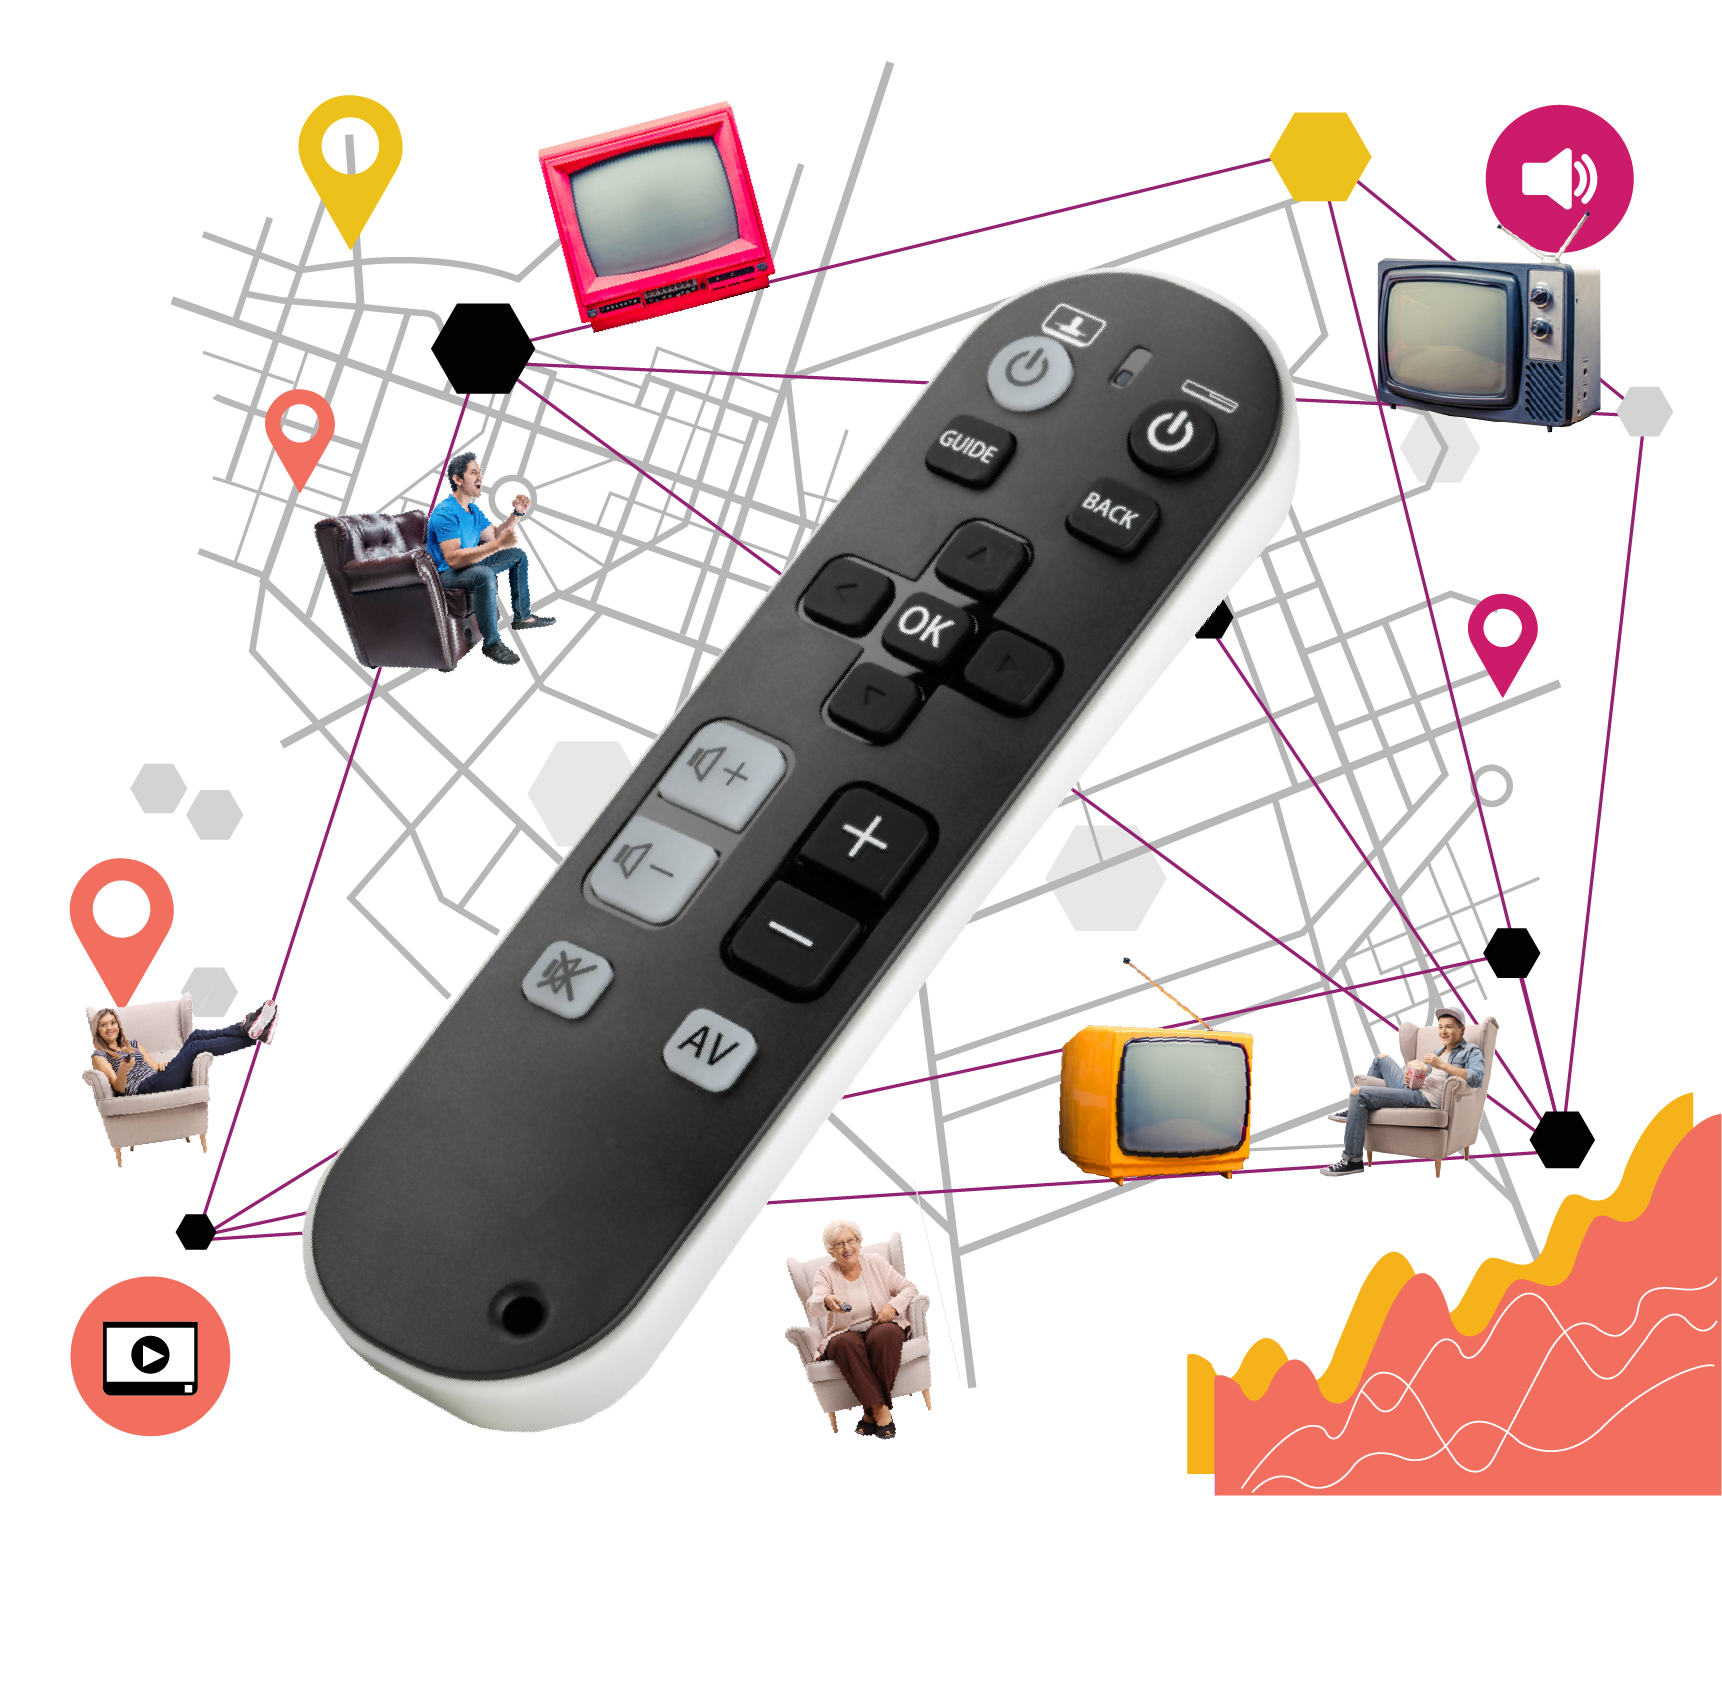 ADDtv featured image, illustration depicting a remote control with a person around him enjoying the connected TV.